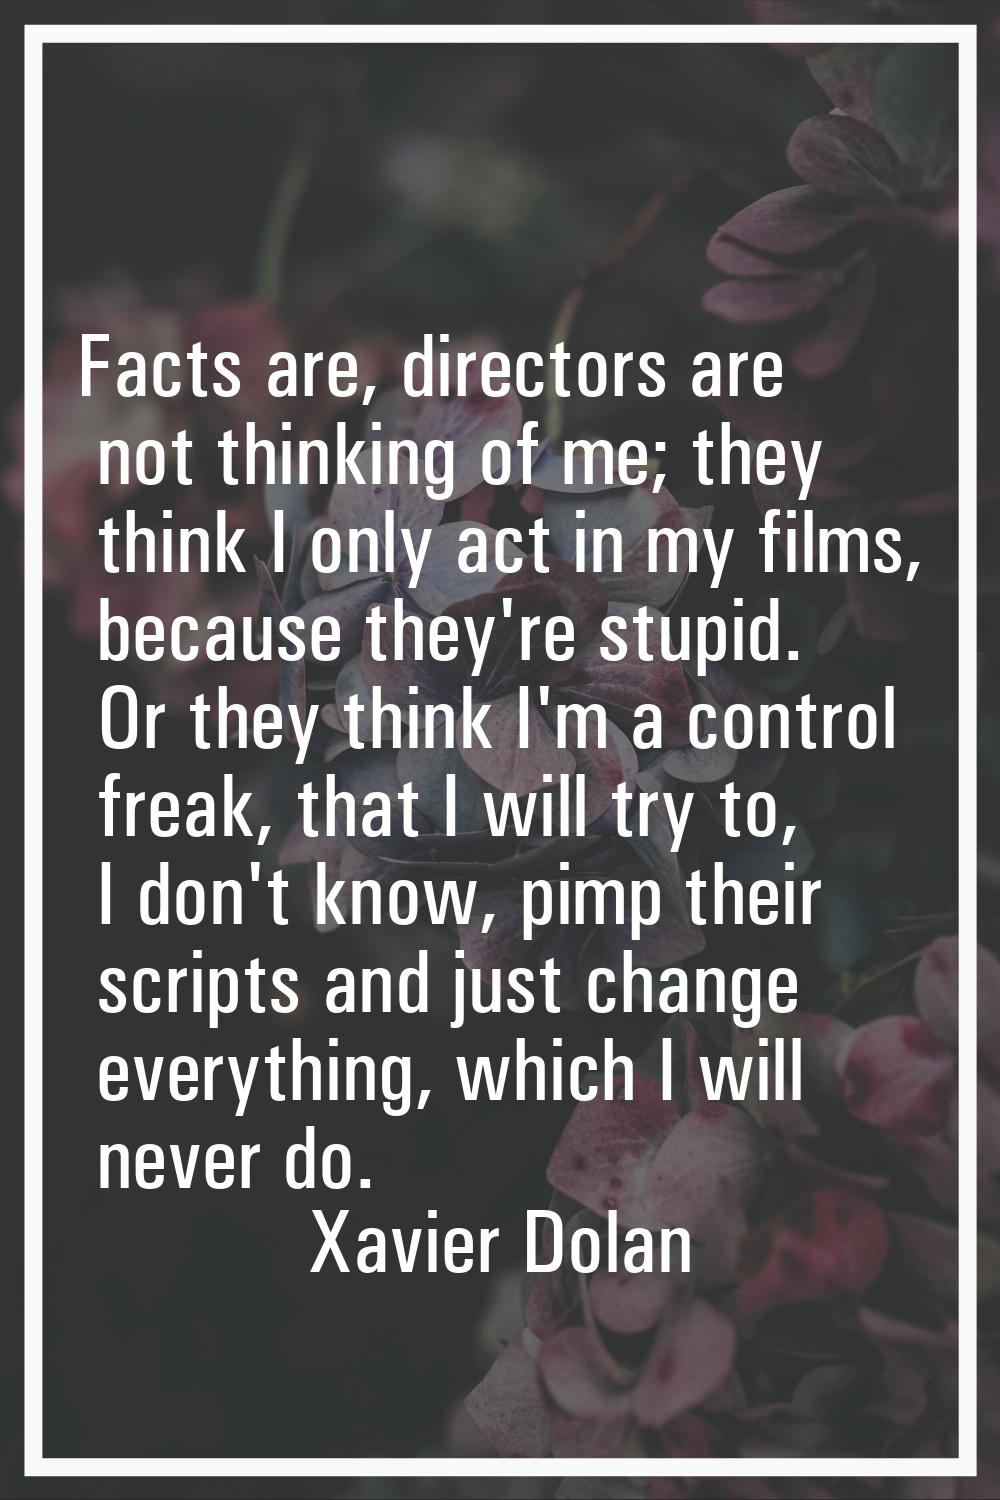 Facts are, directors are not thinking of me; they think I only act in my films, because they're stu